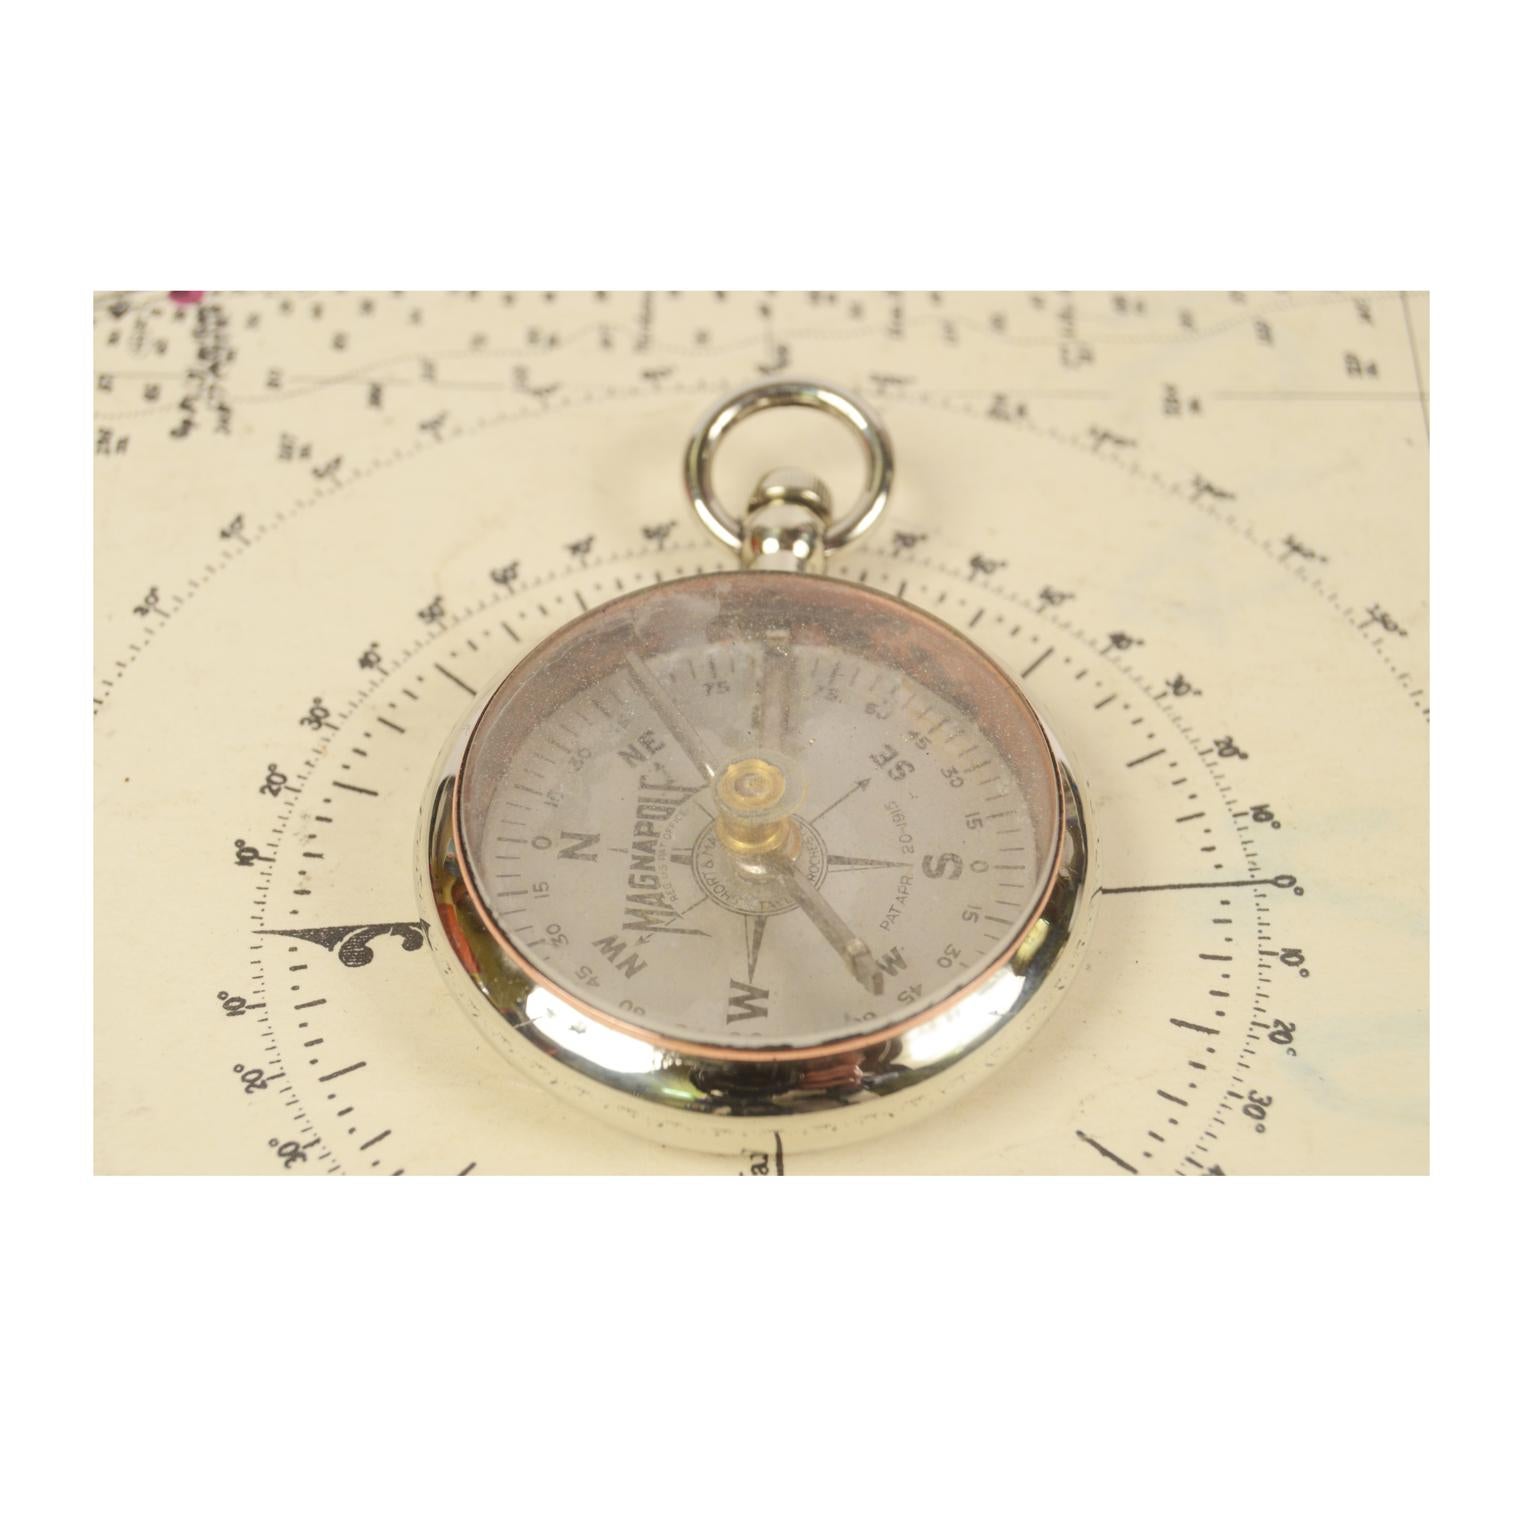 Pocket compass for an American army officer during the First World War of chromed brass in the shape of a pocket watch, signed Magnapole Short & Mason Taylor Rochester NY Pat Apr 20 1915. The compass is complete with goniometric circle, and compass